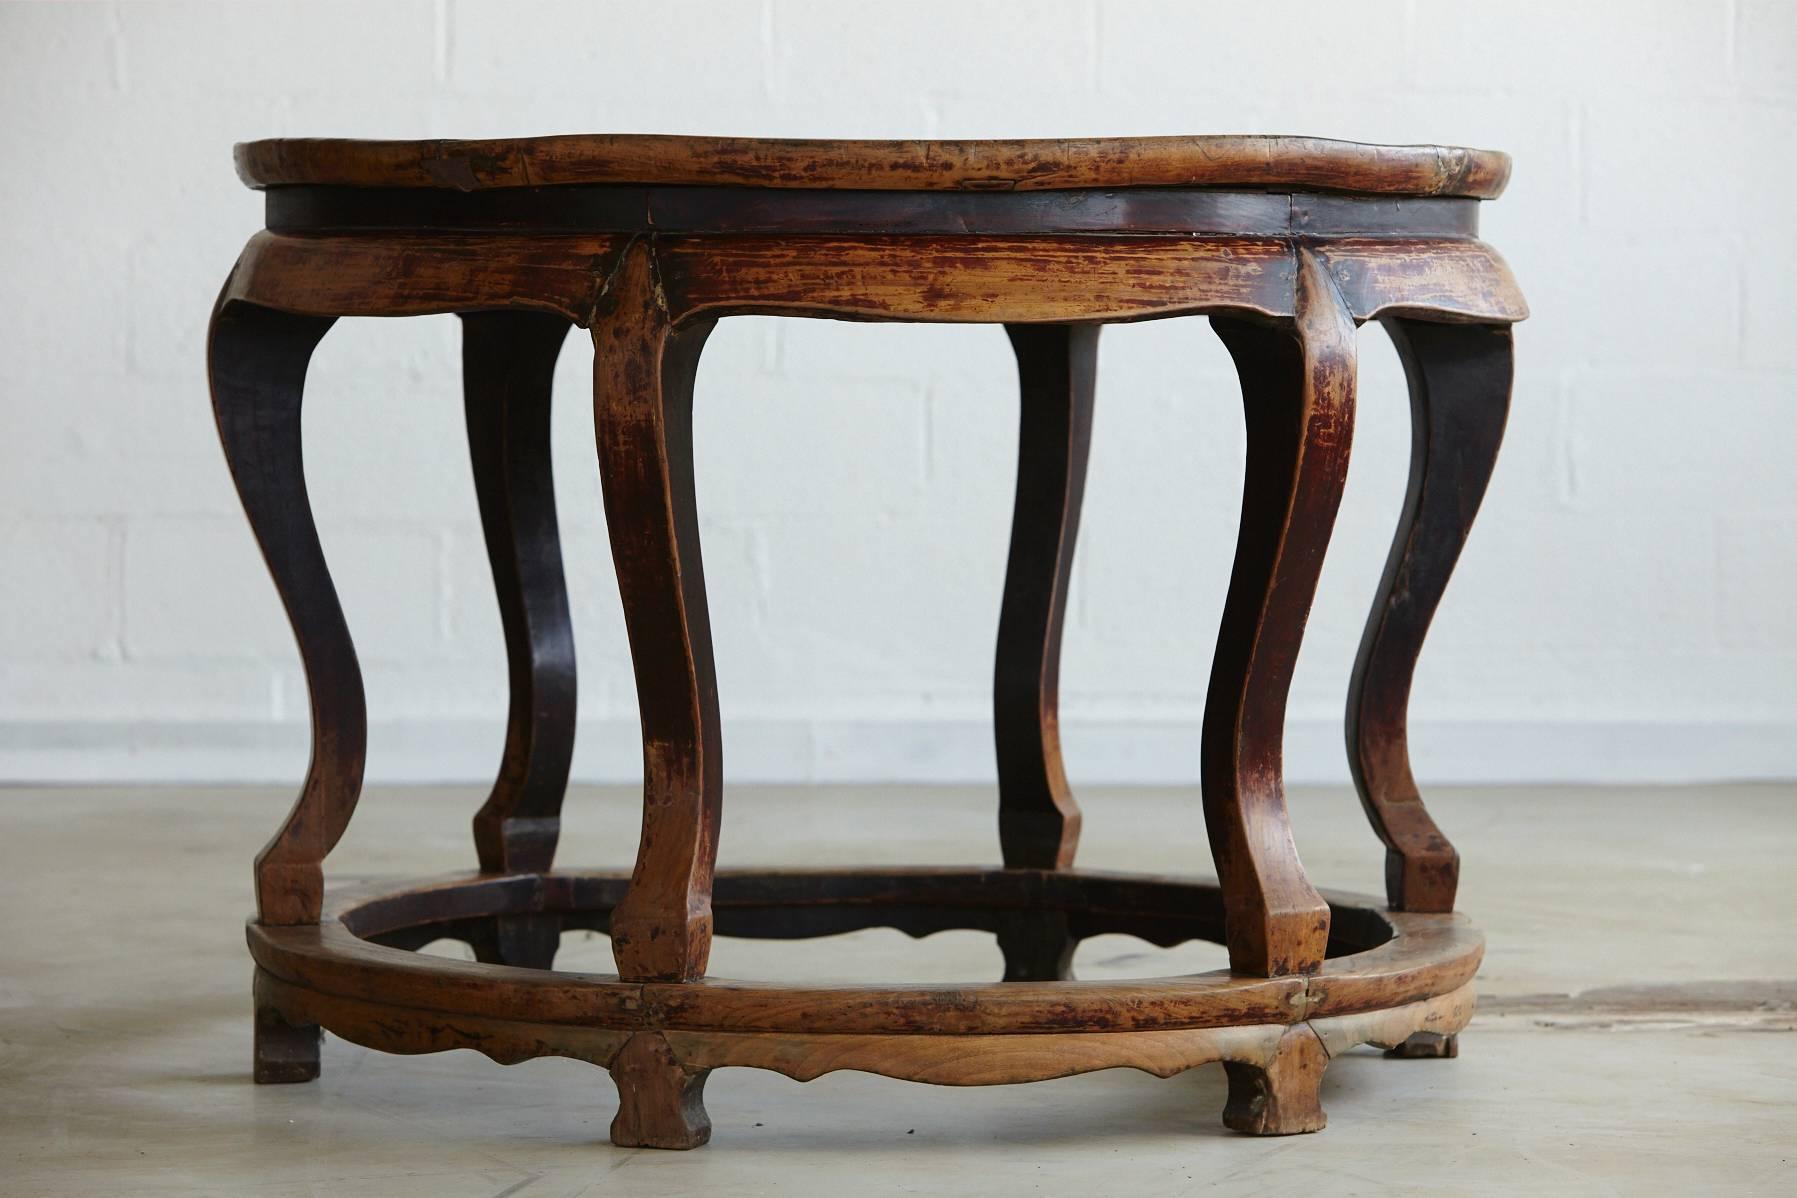 Antique Chinese Export hand carved round elm wood center table with 6 cabriole legs mounted on a round stretcher. 
The table has a very nice patina, wax polished, with little dents and dings,  slightly uneven areas within the top, a well lived